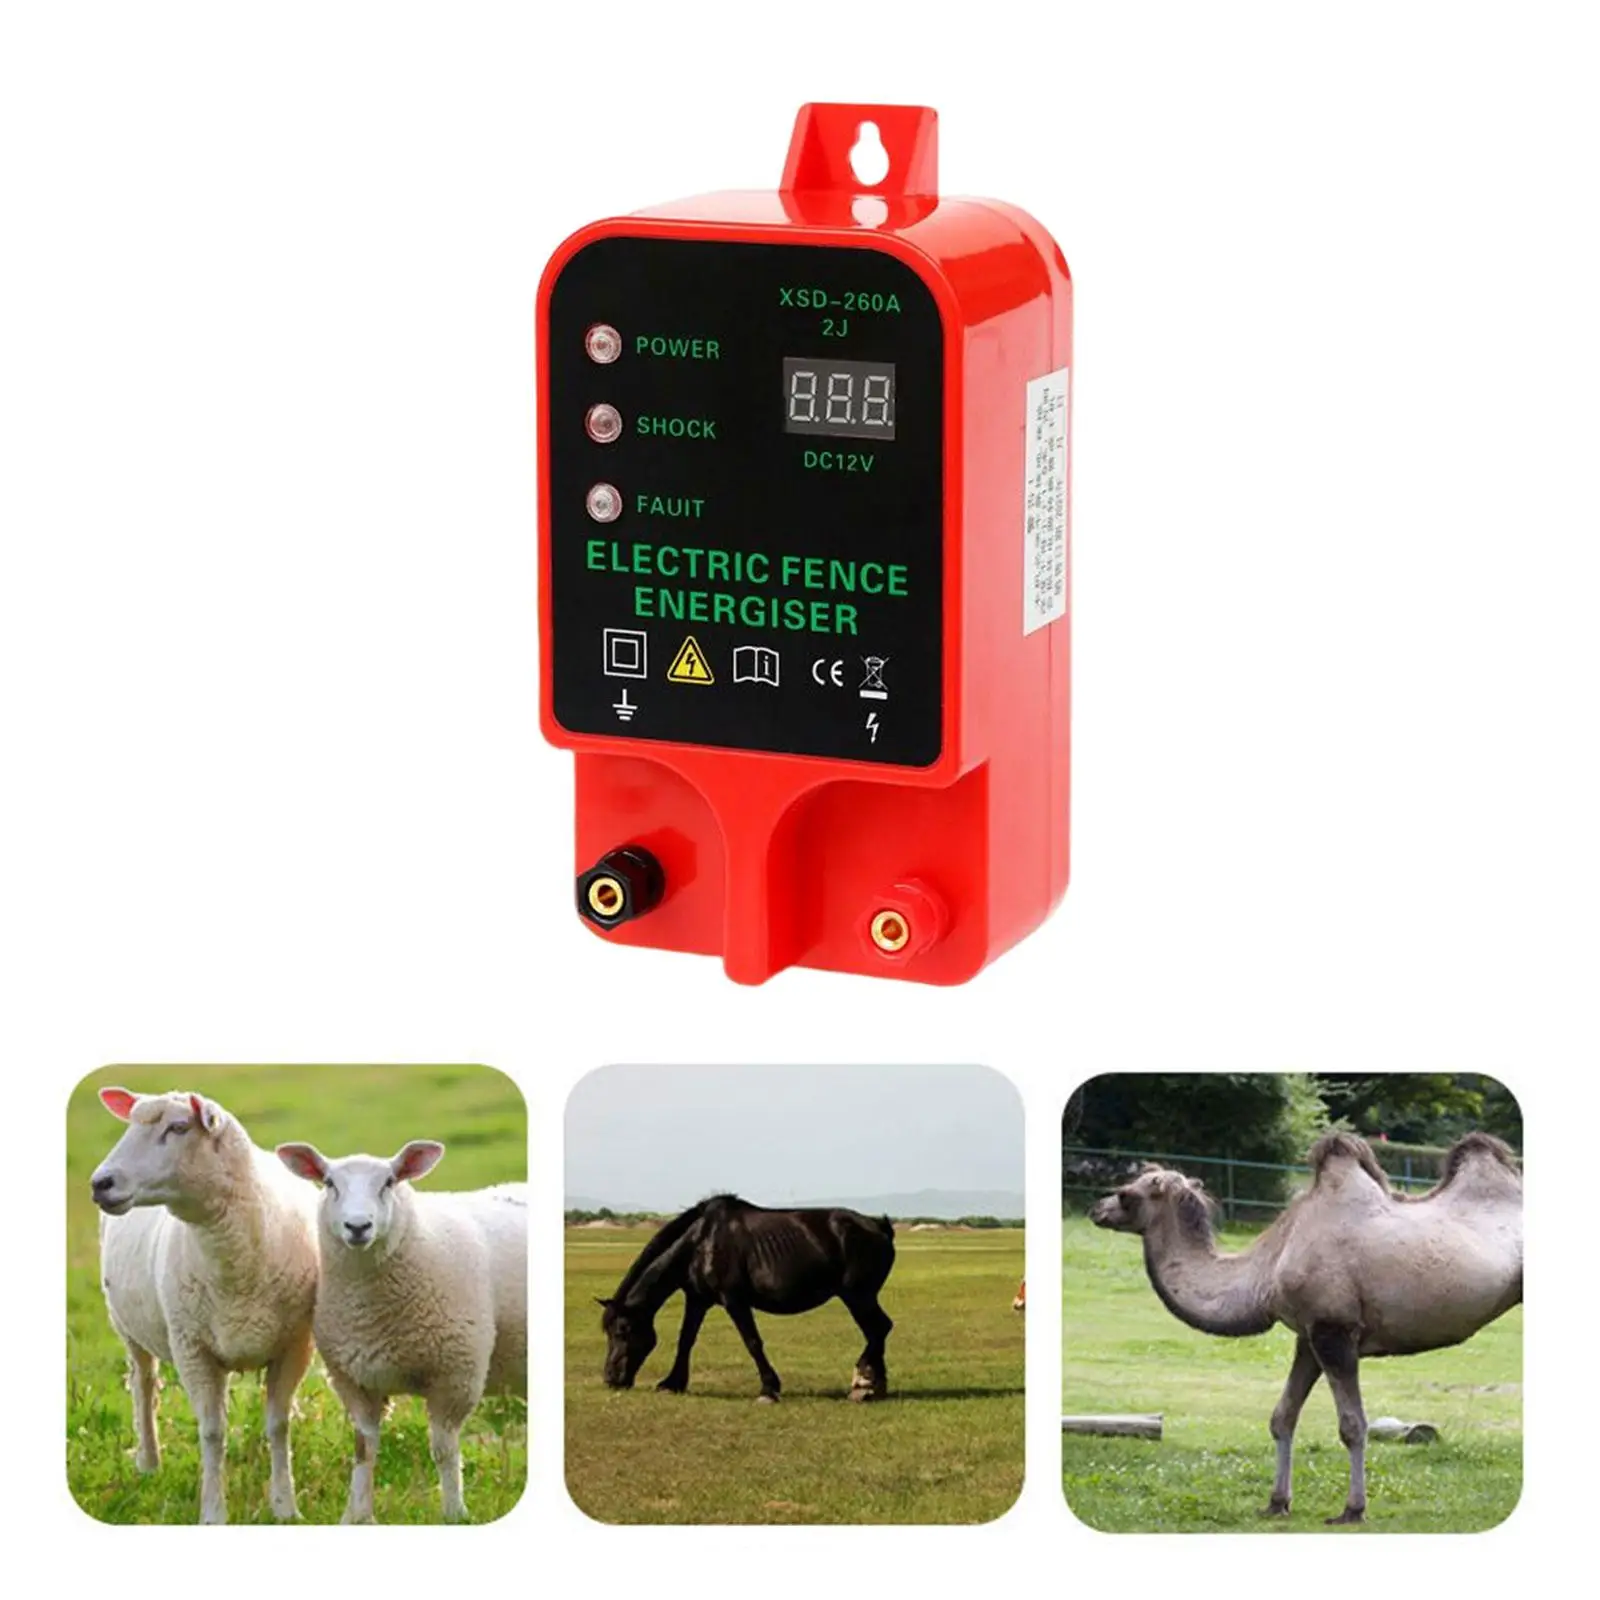 Multipurpose Electric Fence Energizer Controller Sheep Horse Cattle Fence Tool Prevent Poultry for Garden Home Lawn US